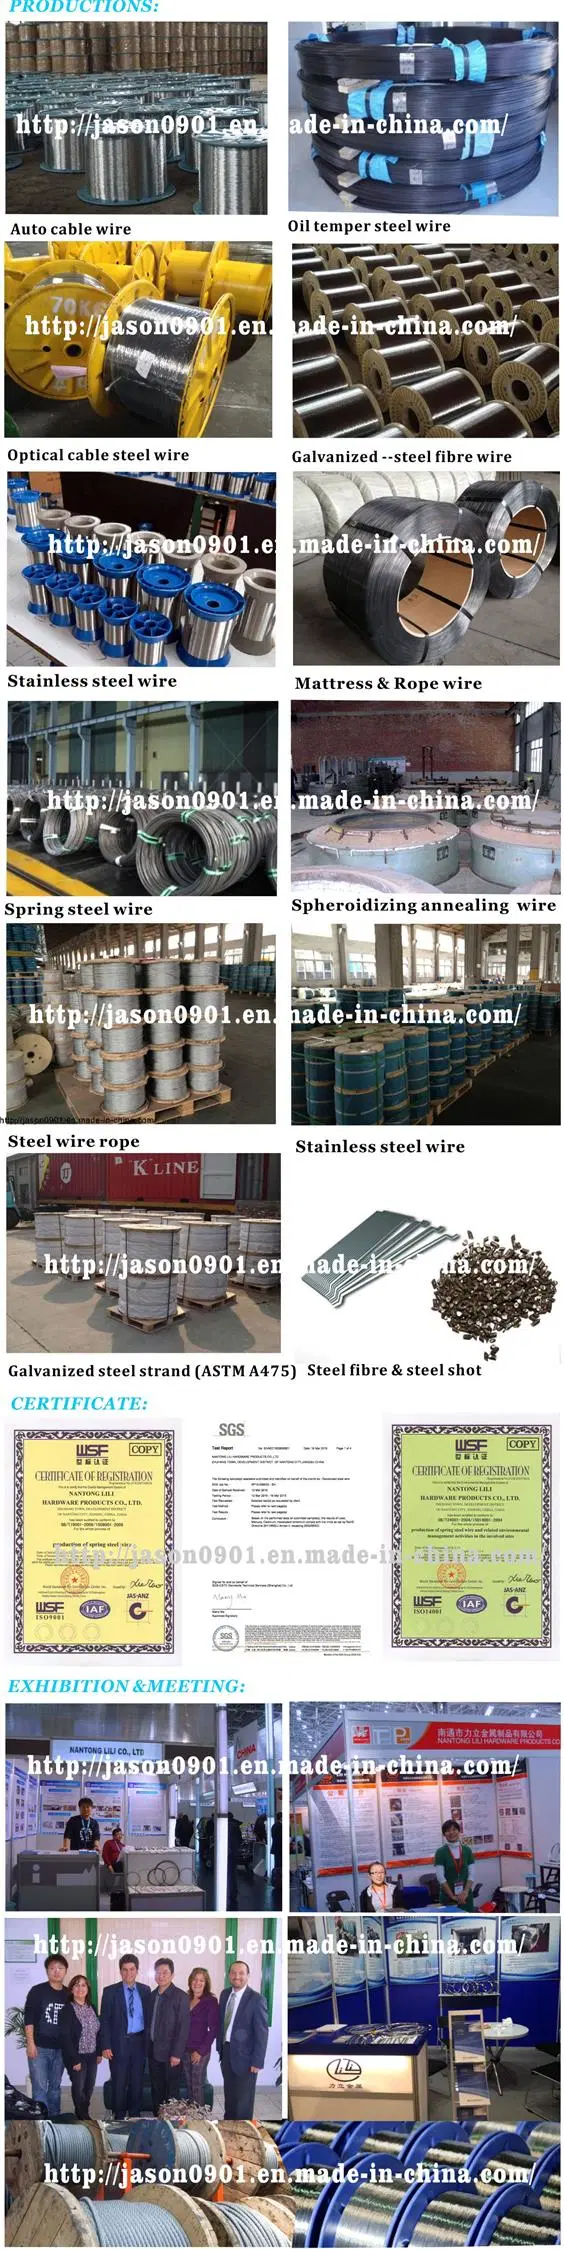 19*7 Non-Rotating Wire Rope, Galvanized Steel Wire Rope for Crane